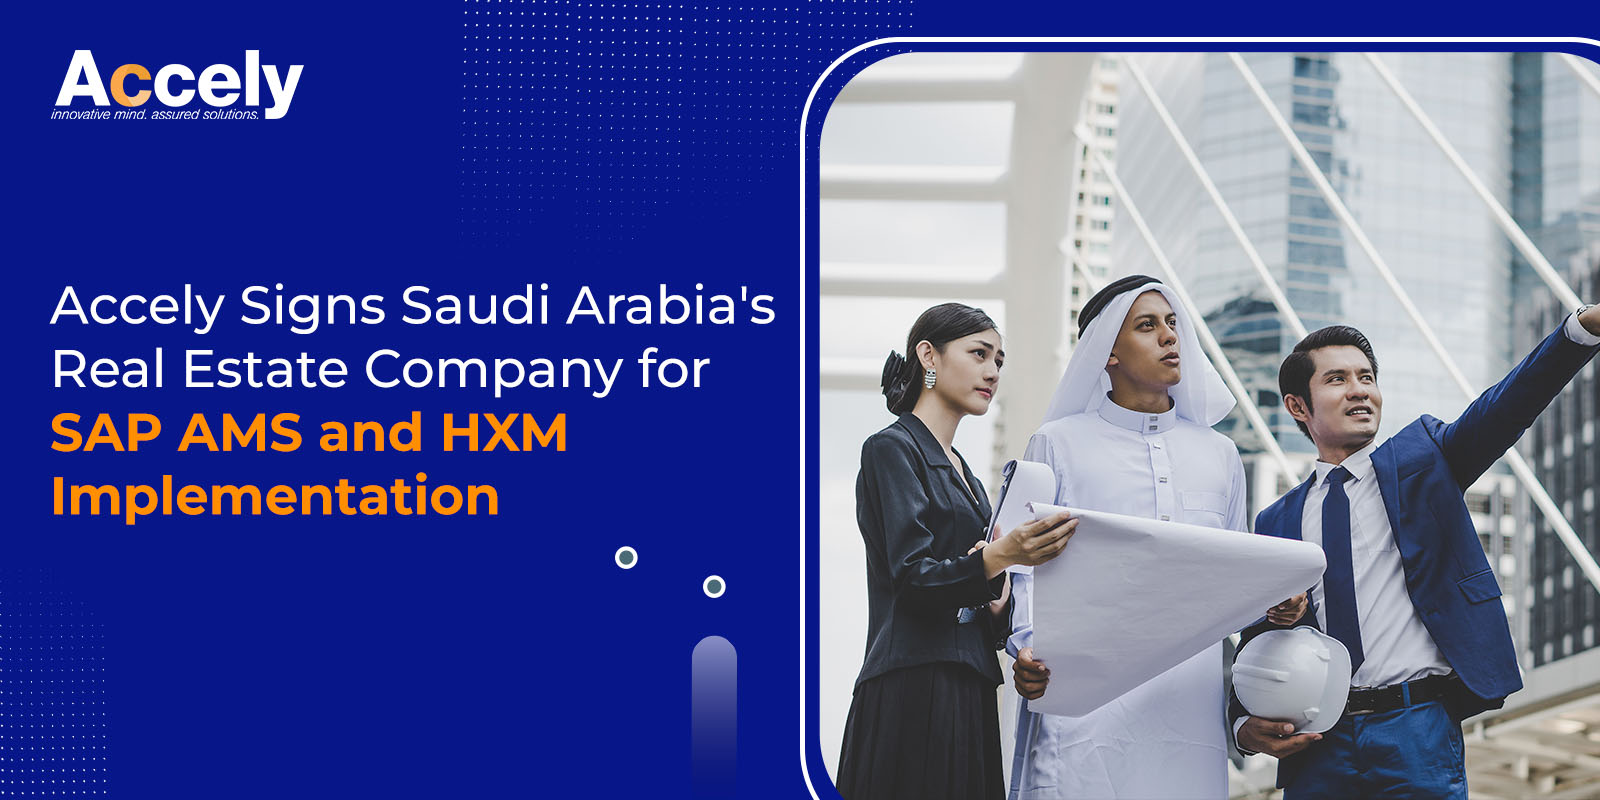 Accely Signs Saudi Arabia's Real Estate Company for SAP AMS and HXM Implementation